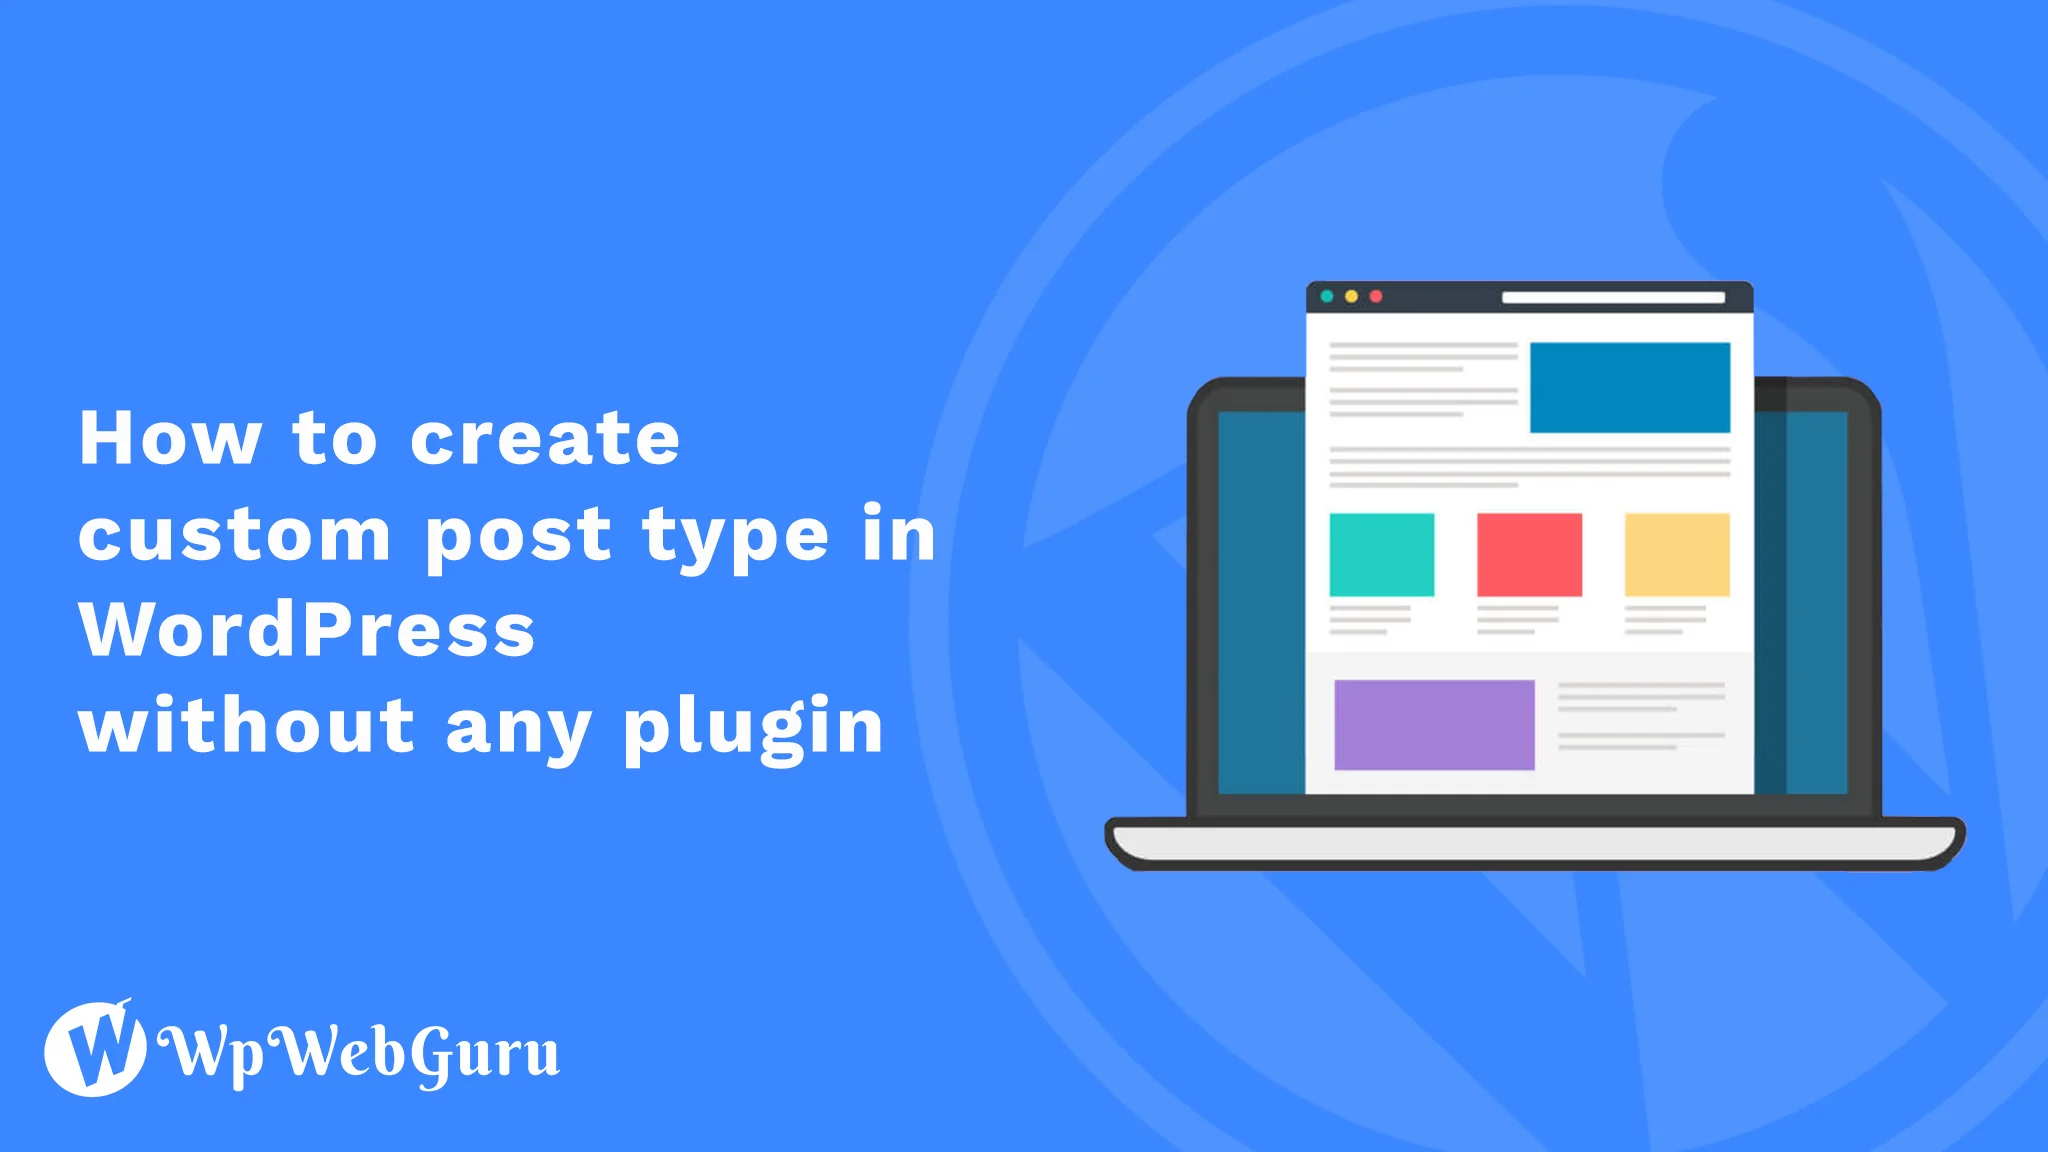 How to create custom post type WordPress without any plugin